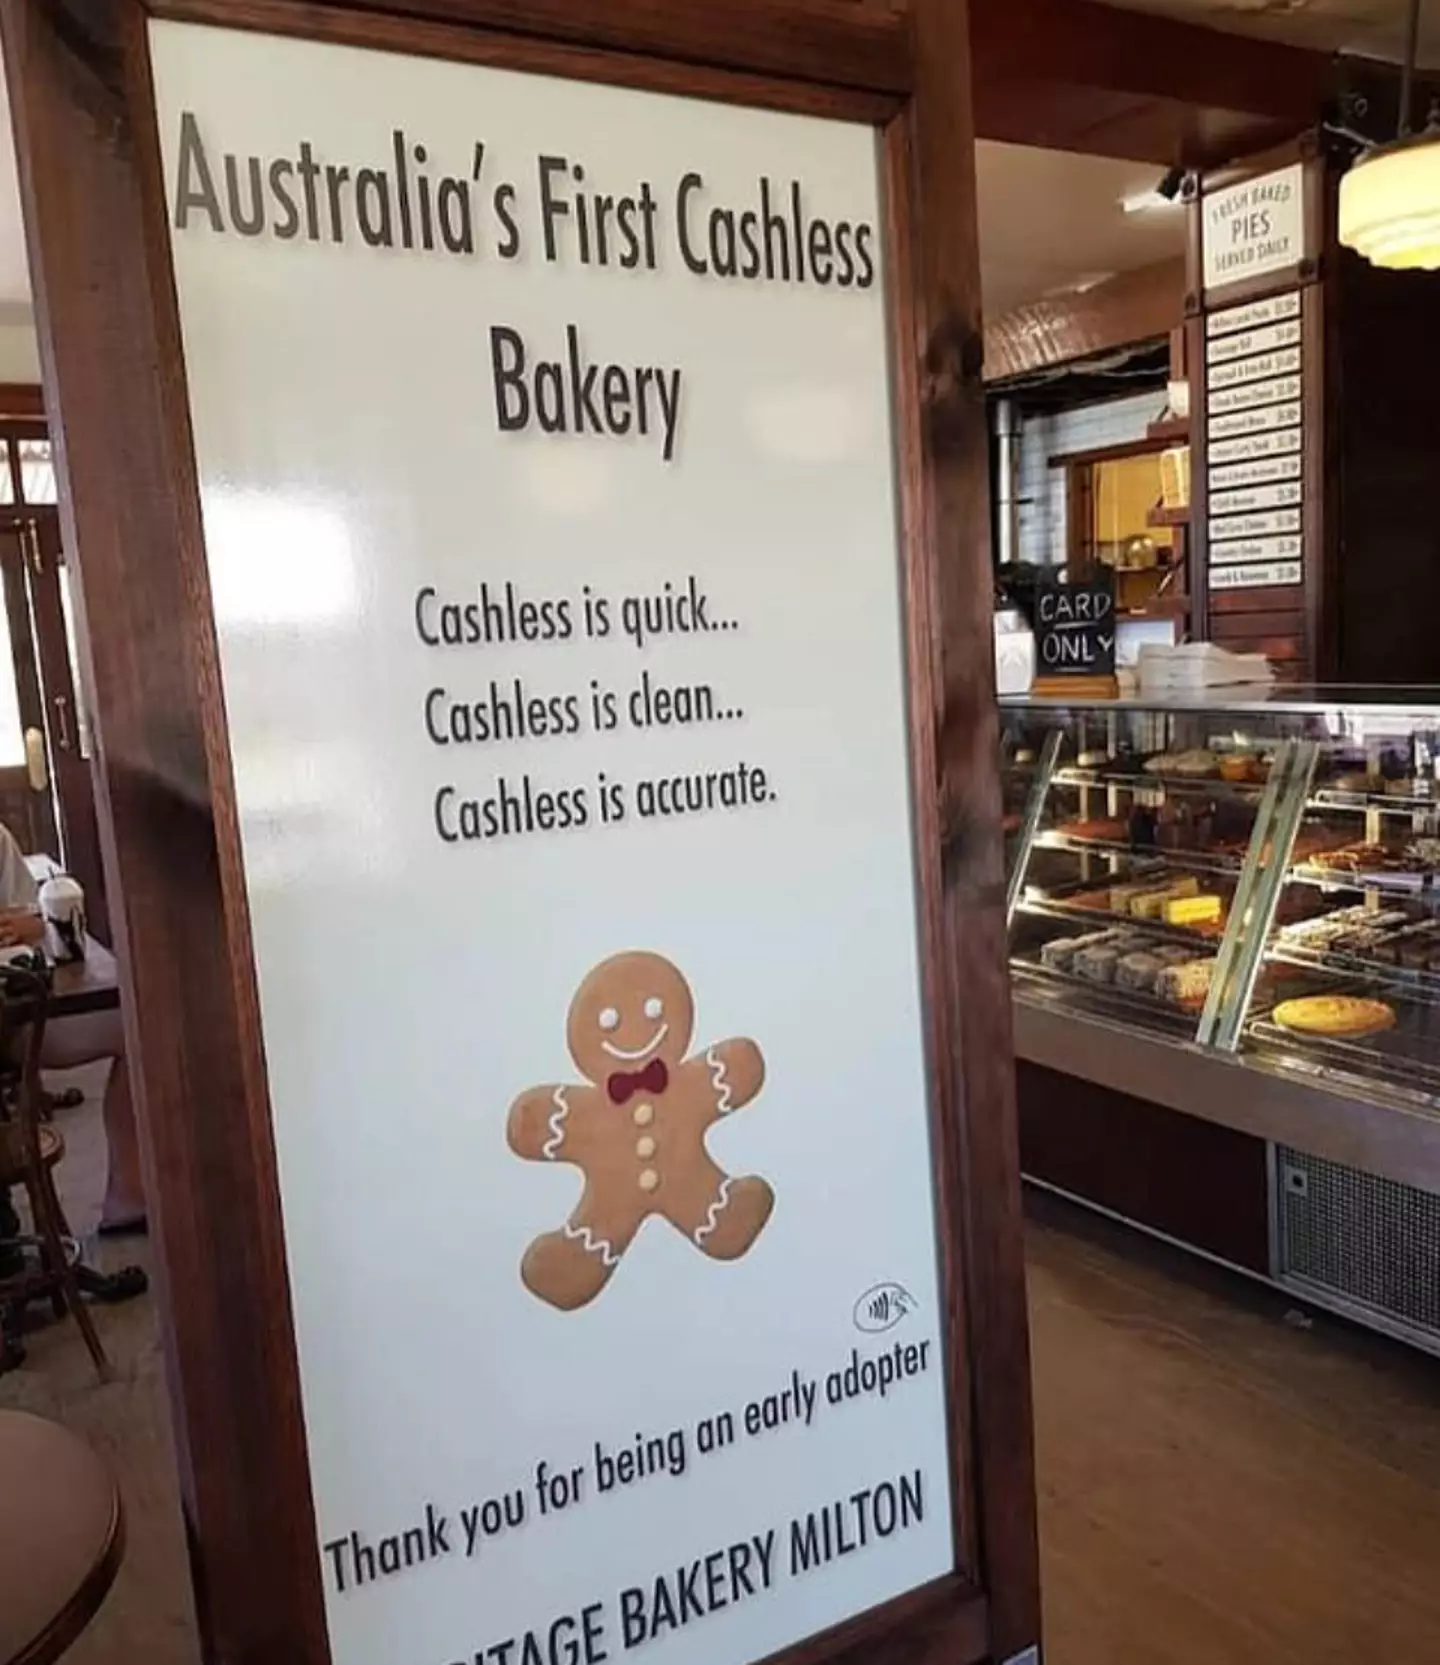 The bakery's sign has been divisive, to say the least.